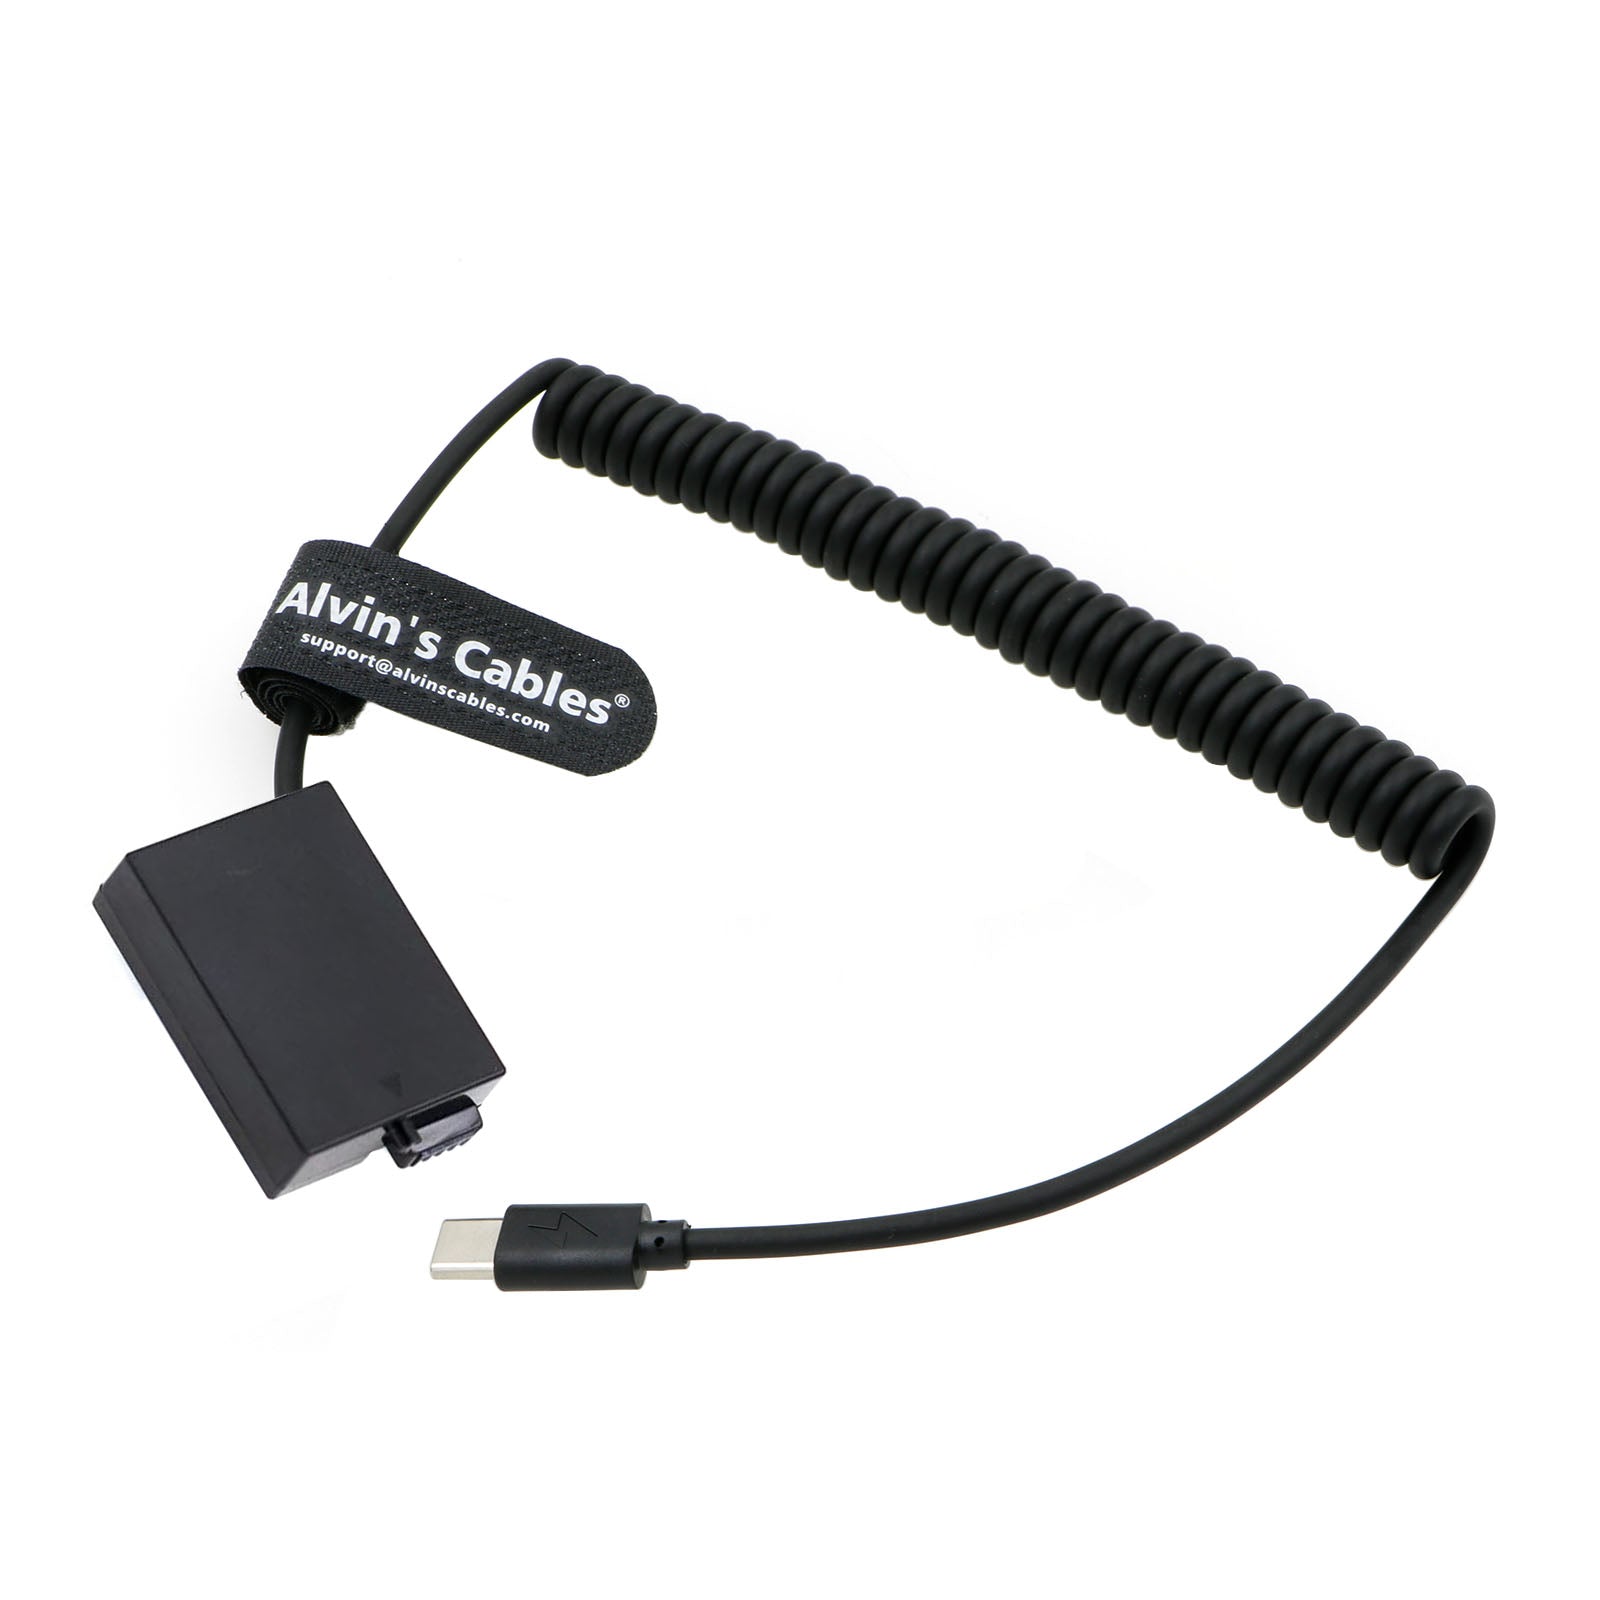 Alvin's Cables LP-E8 Dummy Battery to PD USB C Decoded LP-E8 Battery Replacement Coiled Power Cable for Canon EOS 700D 650D 600D 550D Rebel T5i T4i T3i T2i Cameras